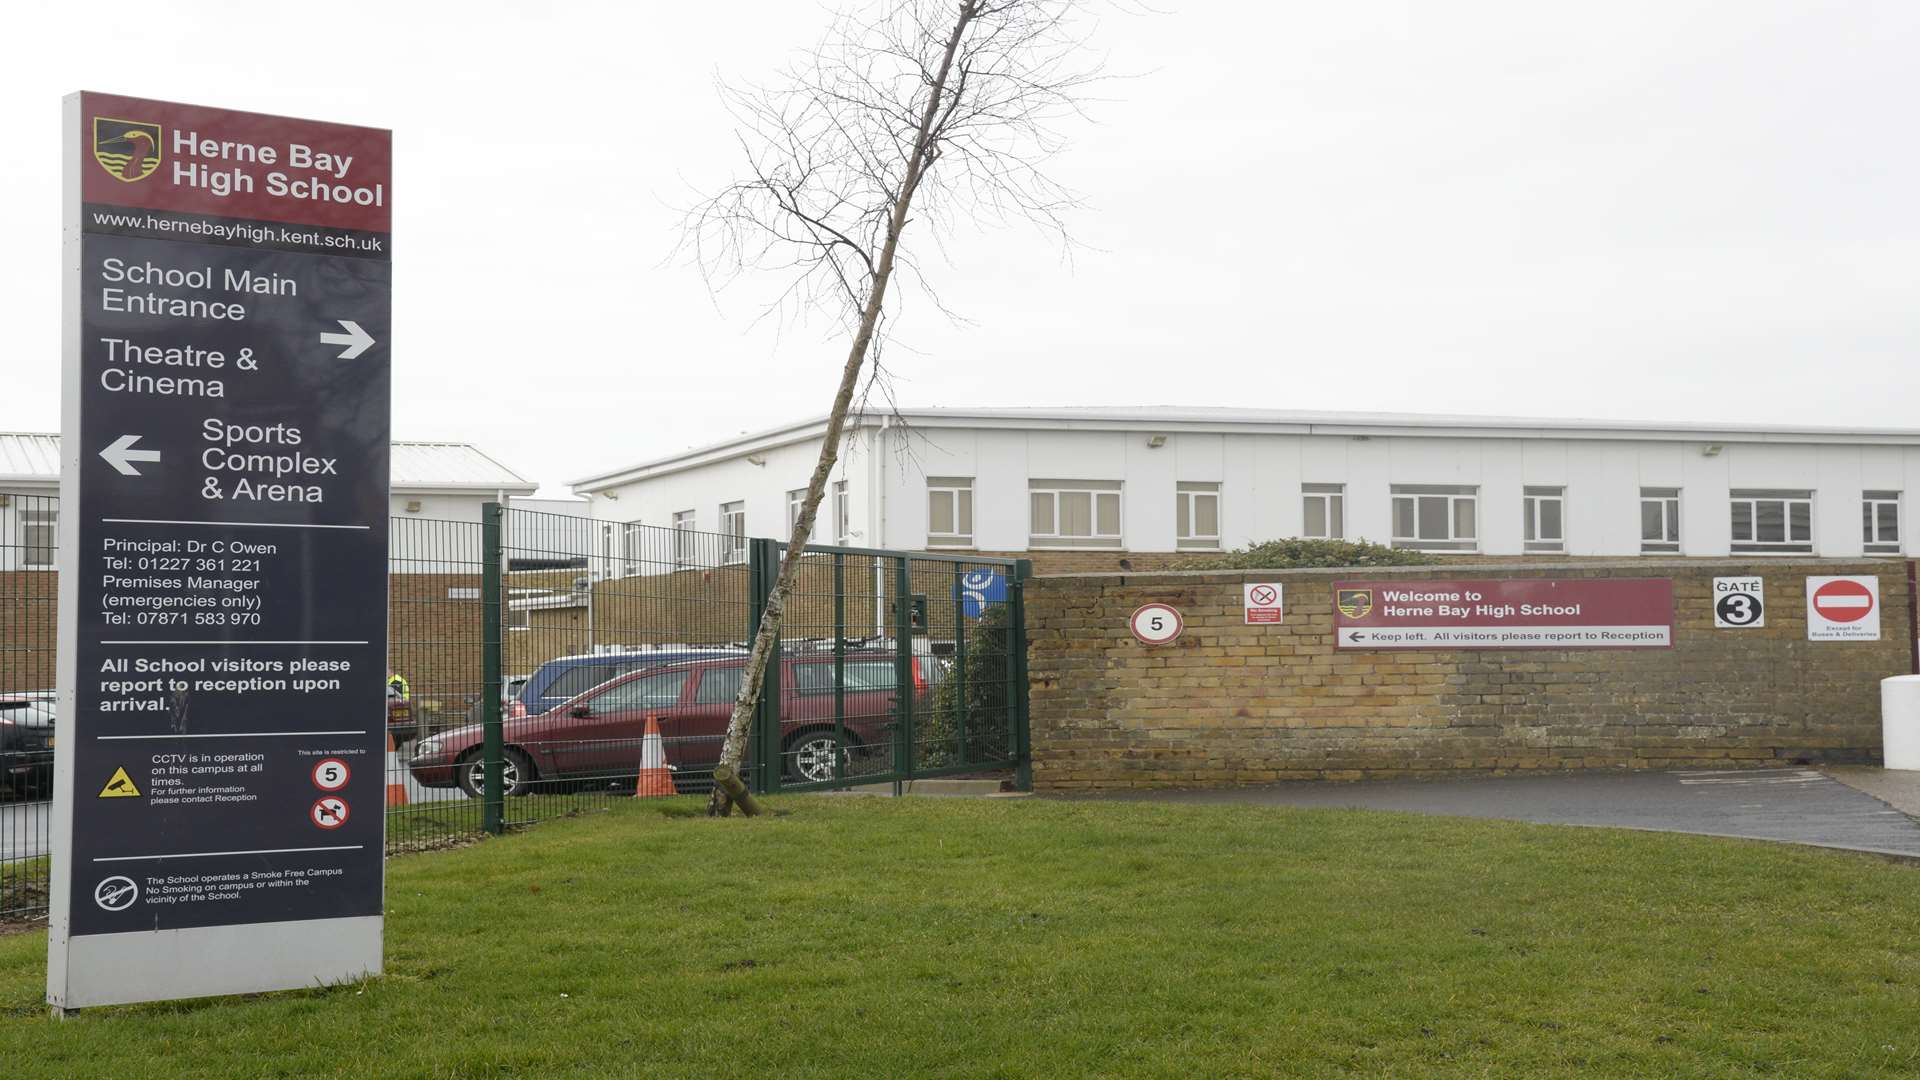 The abuse happened at Herne Bay High School